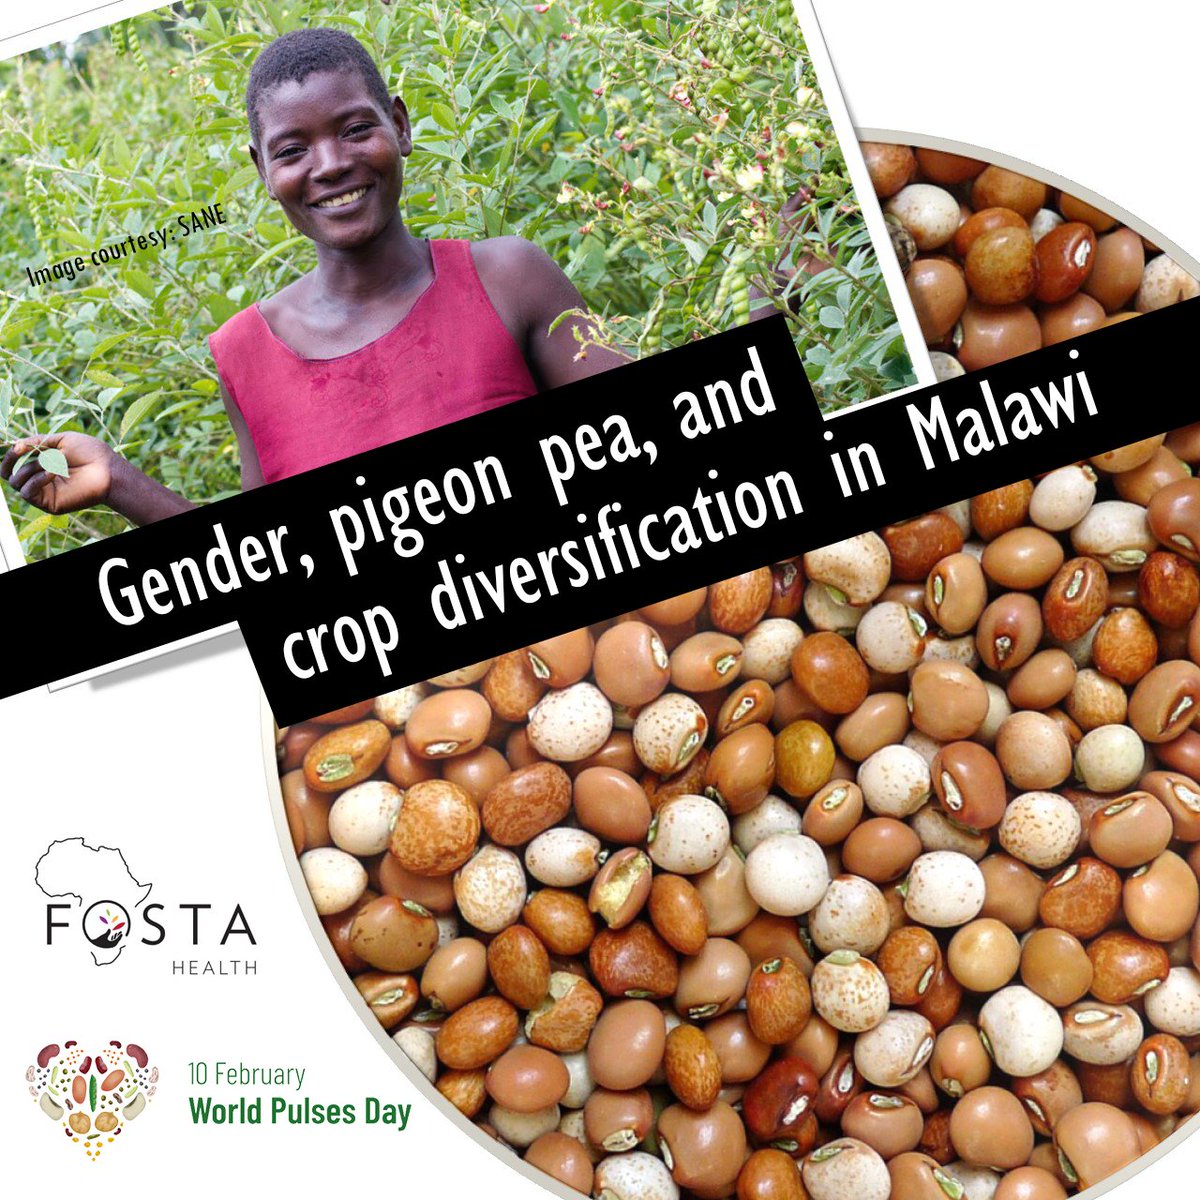 In Southern #Malawi, Pigeon Pea is a key source of fodder, fuel, and income for #women. More in this blogpost about our research plans examining that: tinyurl.com/3hbp9szb Counting down to #WorldPulsesDay on Feb 10. #LovePulses